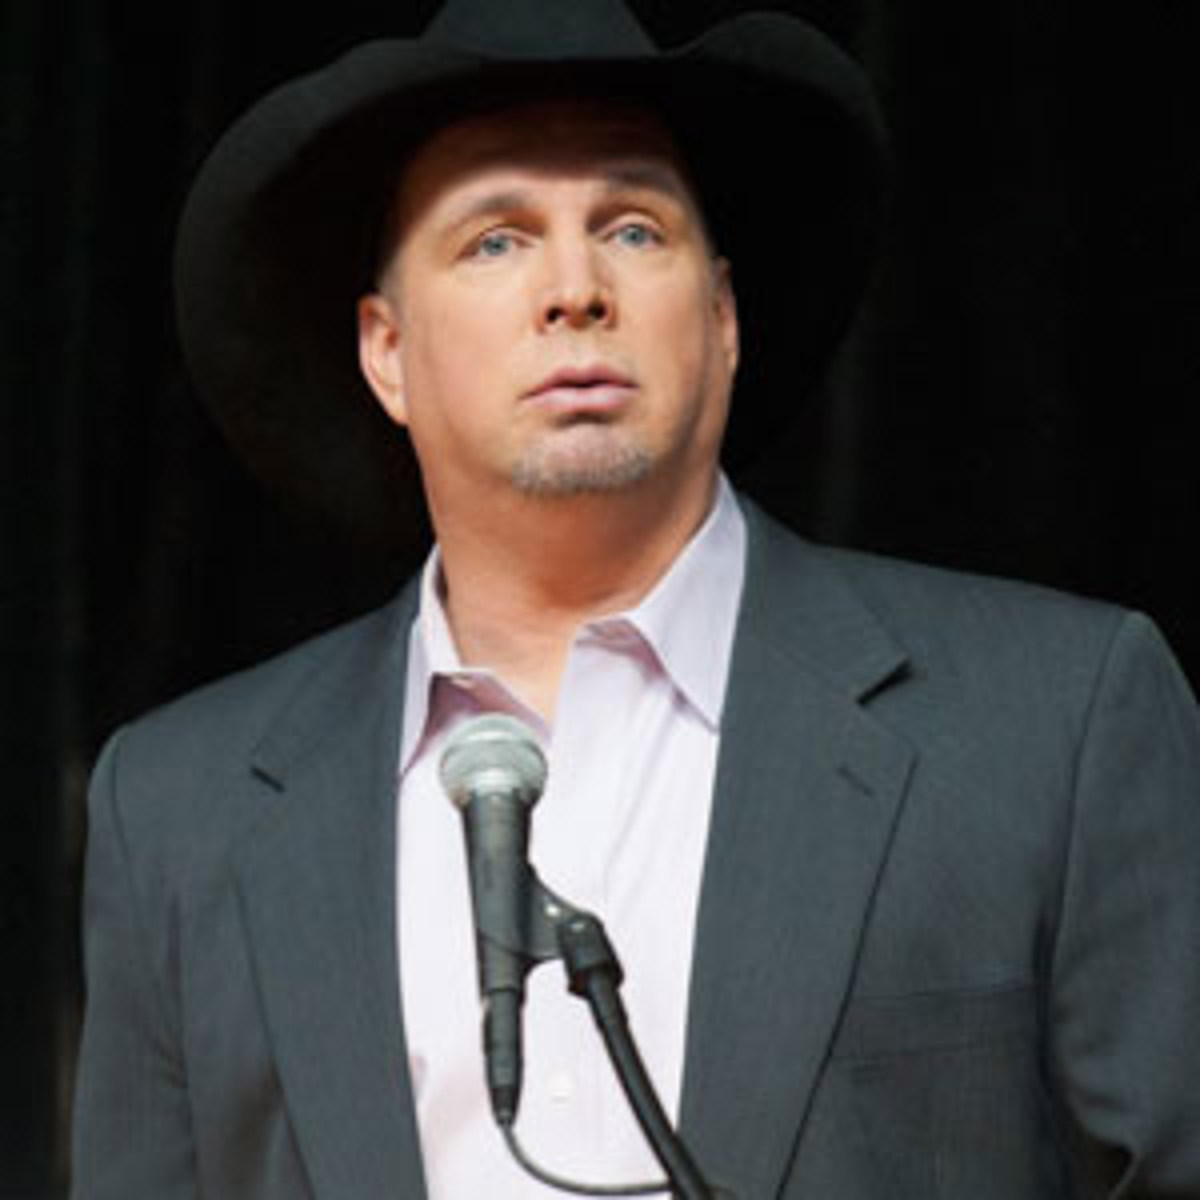 Banned Country Songs – Garth Brooks, 'The Thunder Rolls'